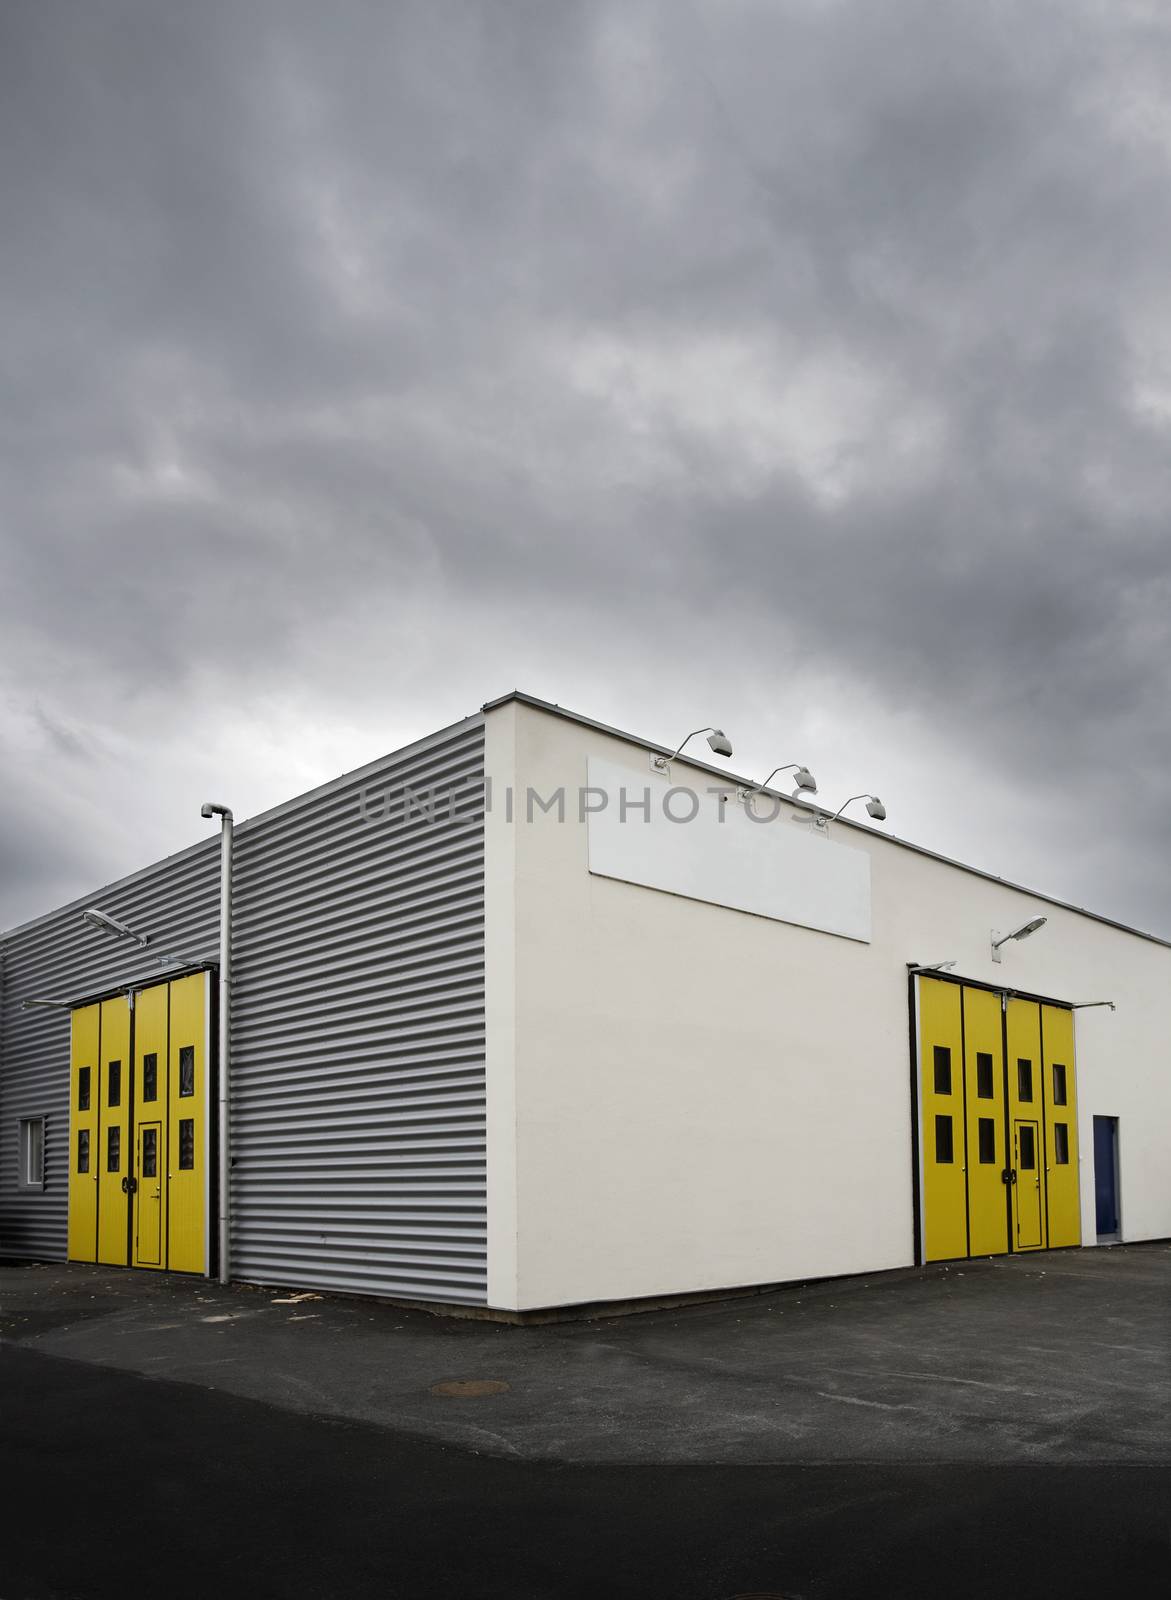 Warehouse with yellow doors at dusk